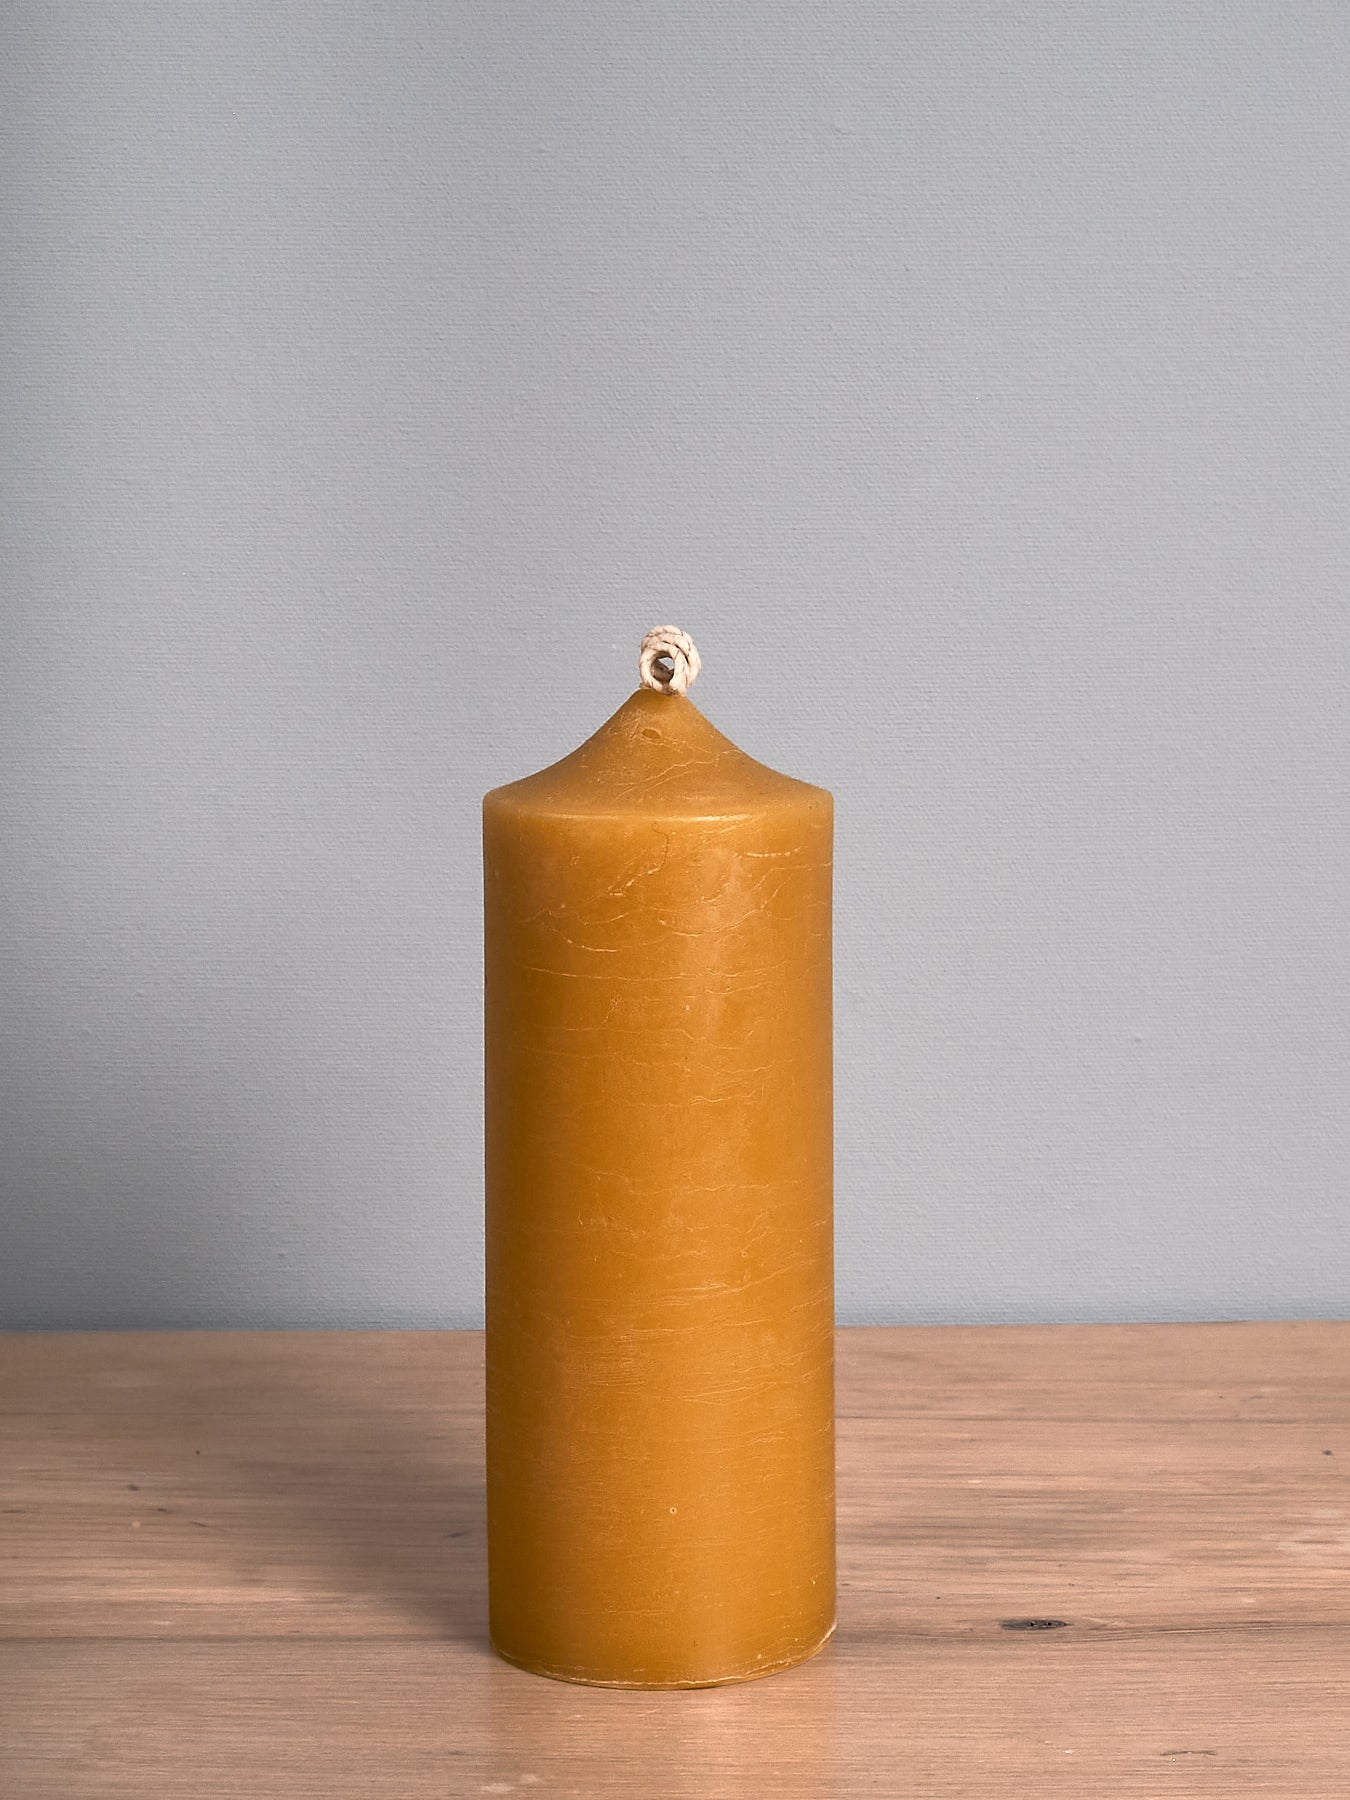 A Cafe Candle – Tall by Hohepa Candles is sitting on a wooden table.